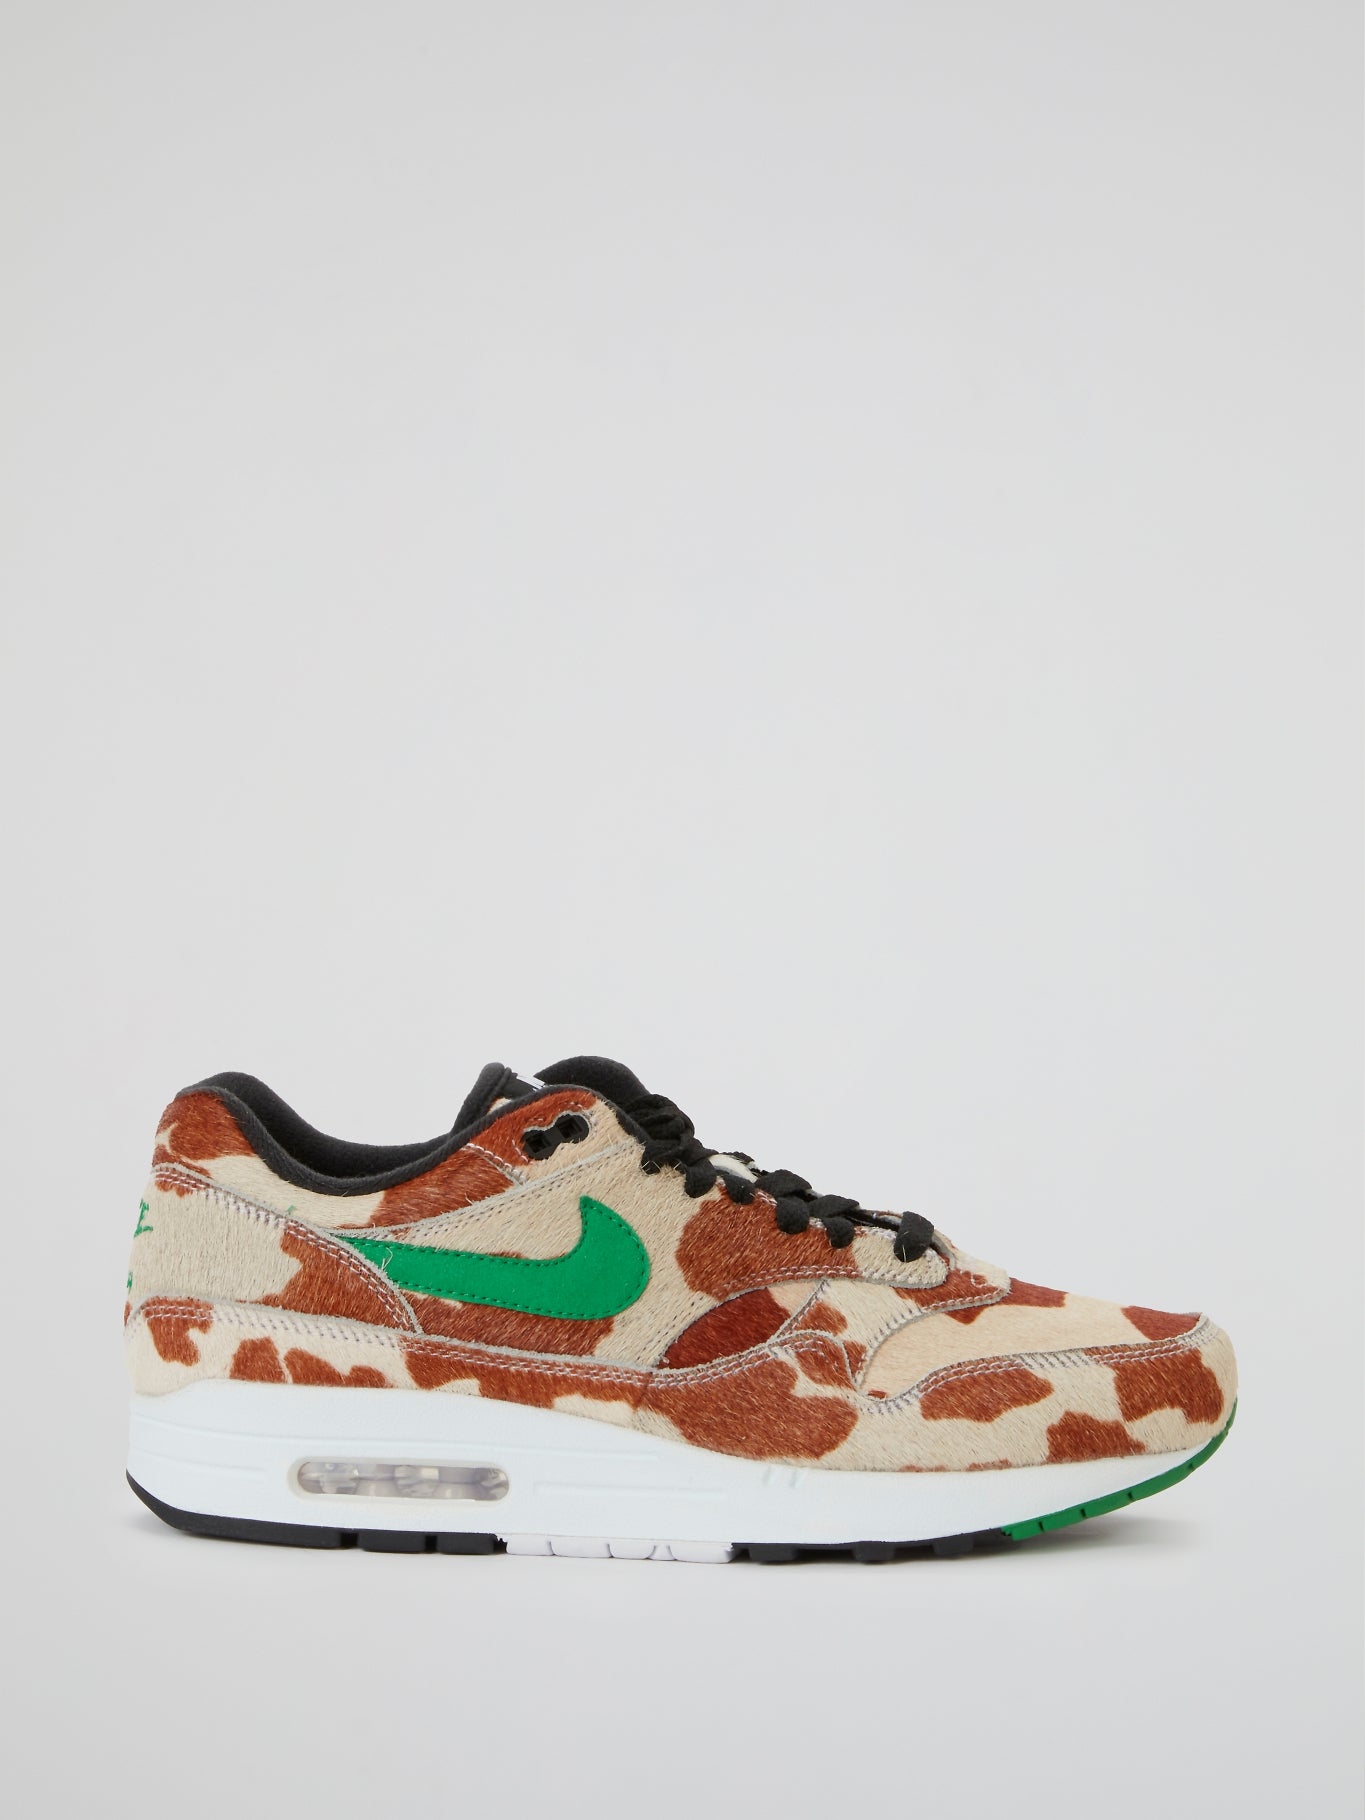 Moreel delen Pilfer Atmos x Air Max 1 DLX Animal Pack Sneakers (Size 9) – Maison-B-More Global  Store